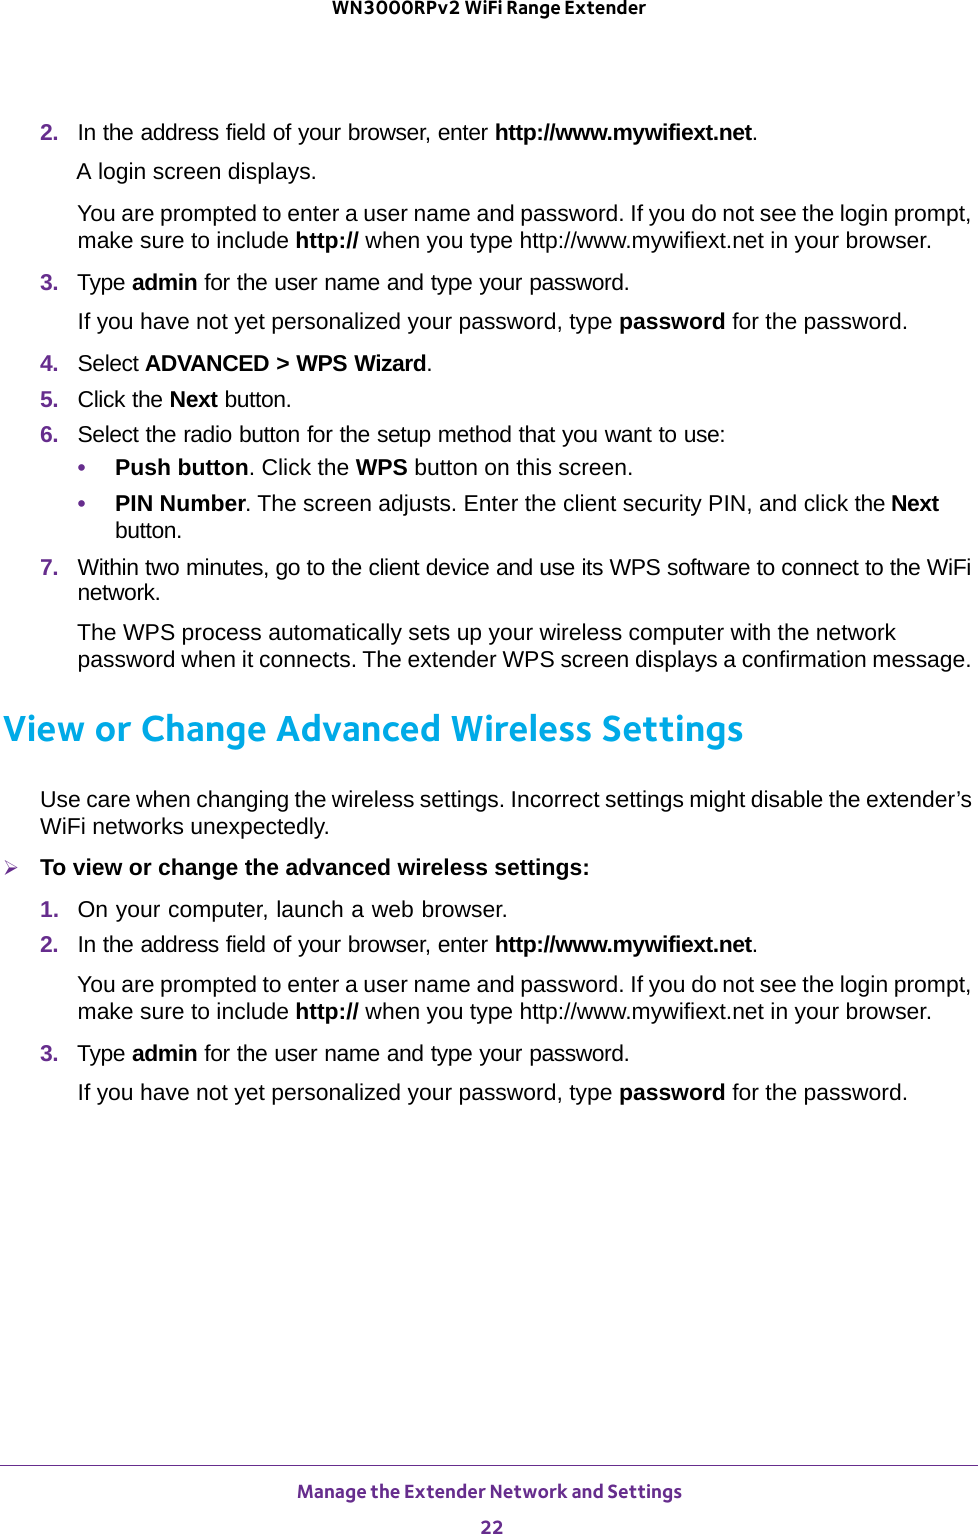 Manage the Extender Network and Settings 22WN3000RPv2 WiFi Range Extender 2. In the address field of your browser, enter http://www.mywifiext.net.A login screen displays.You are prompted to enter a user name and password. If you do not see the login prompt, make sure to include http:// when you type http://www.mywifiext.net in your browser.3.  Type admin for the user name and type your password.If you have not yet personalized your password, type password for the password.4. Select ADVANCED &gt; WPS Wizard.5. Click the Next button. 6. Select the radio button for the setup method that you want to use: •Push button. Click the WPS button on this screen. •PIN Number. The screen adjusts. Enter the client security PIN, and click the Next button.7. Within two minutes, go to the client device and use its WPS software to connect to the WiFi network.The WPS process automatically sets up your wireless computer with the network password when it connects. The extender WPS screen displays a confirmation message. View or Change Advanced Wireless SettingsUse care when changing the wireless settings. Incorrect settings might disable the extender’s WiFi networks unexpectedly.To view or change the advanced wireless settings:1.  On your computer, launch a web browser.2.  In the address field of your browser, enter http://www.mywifiext.net.You are prompted to enter a user name and password. If you do not see the login prompt, make sure to include http:// when you type http://www.mywifiext.net in your browser.3.  Type admin for the user name and type your password.If you have not yet personalized your password, type password for the password.